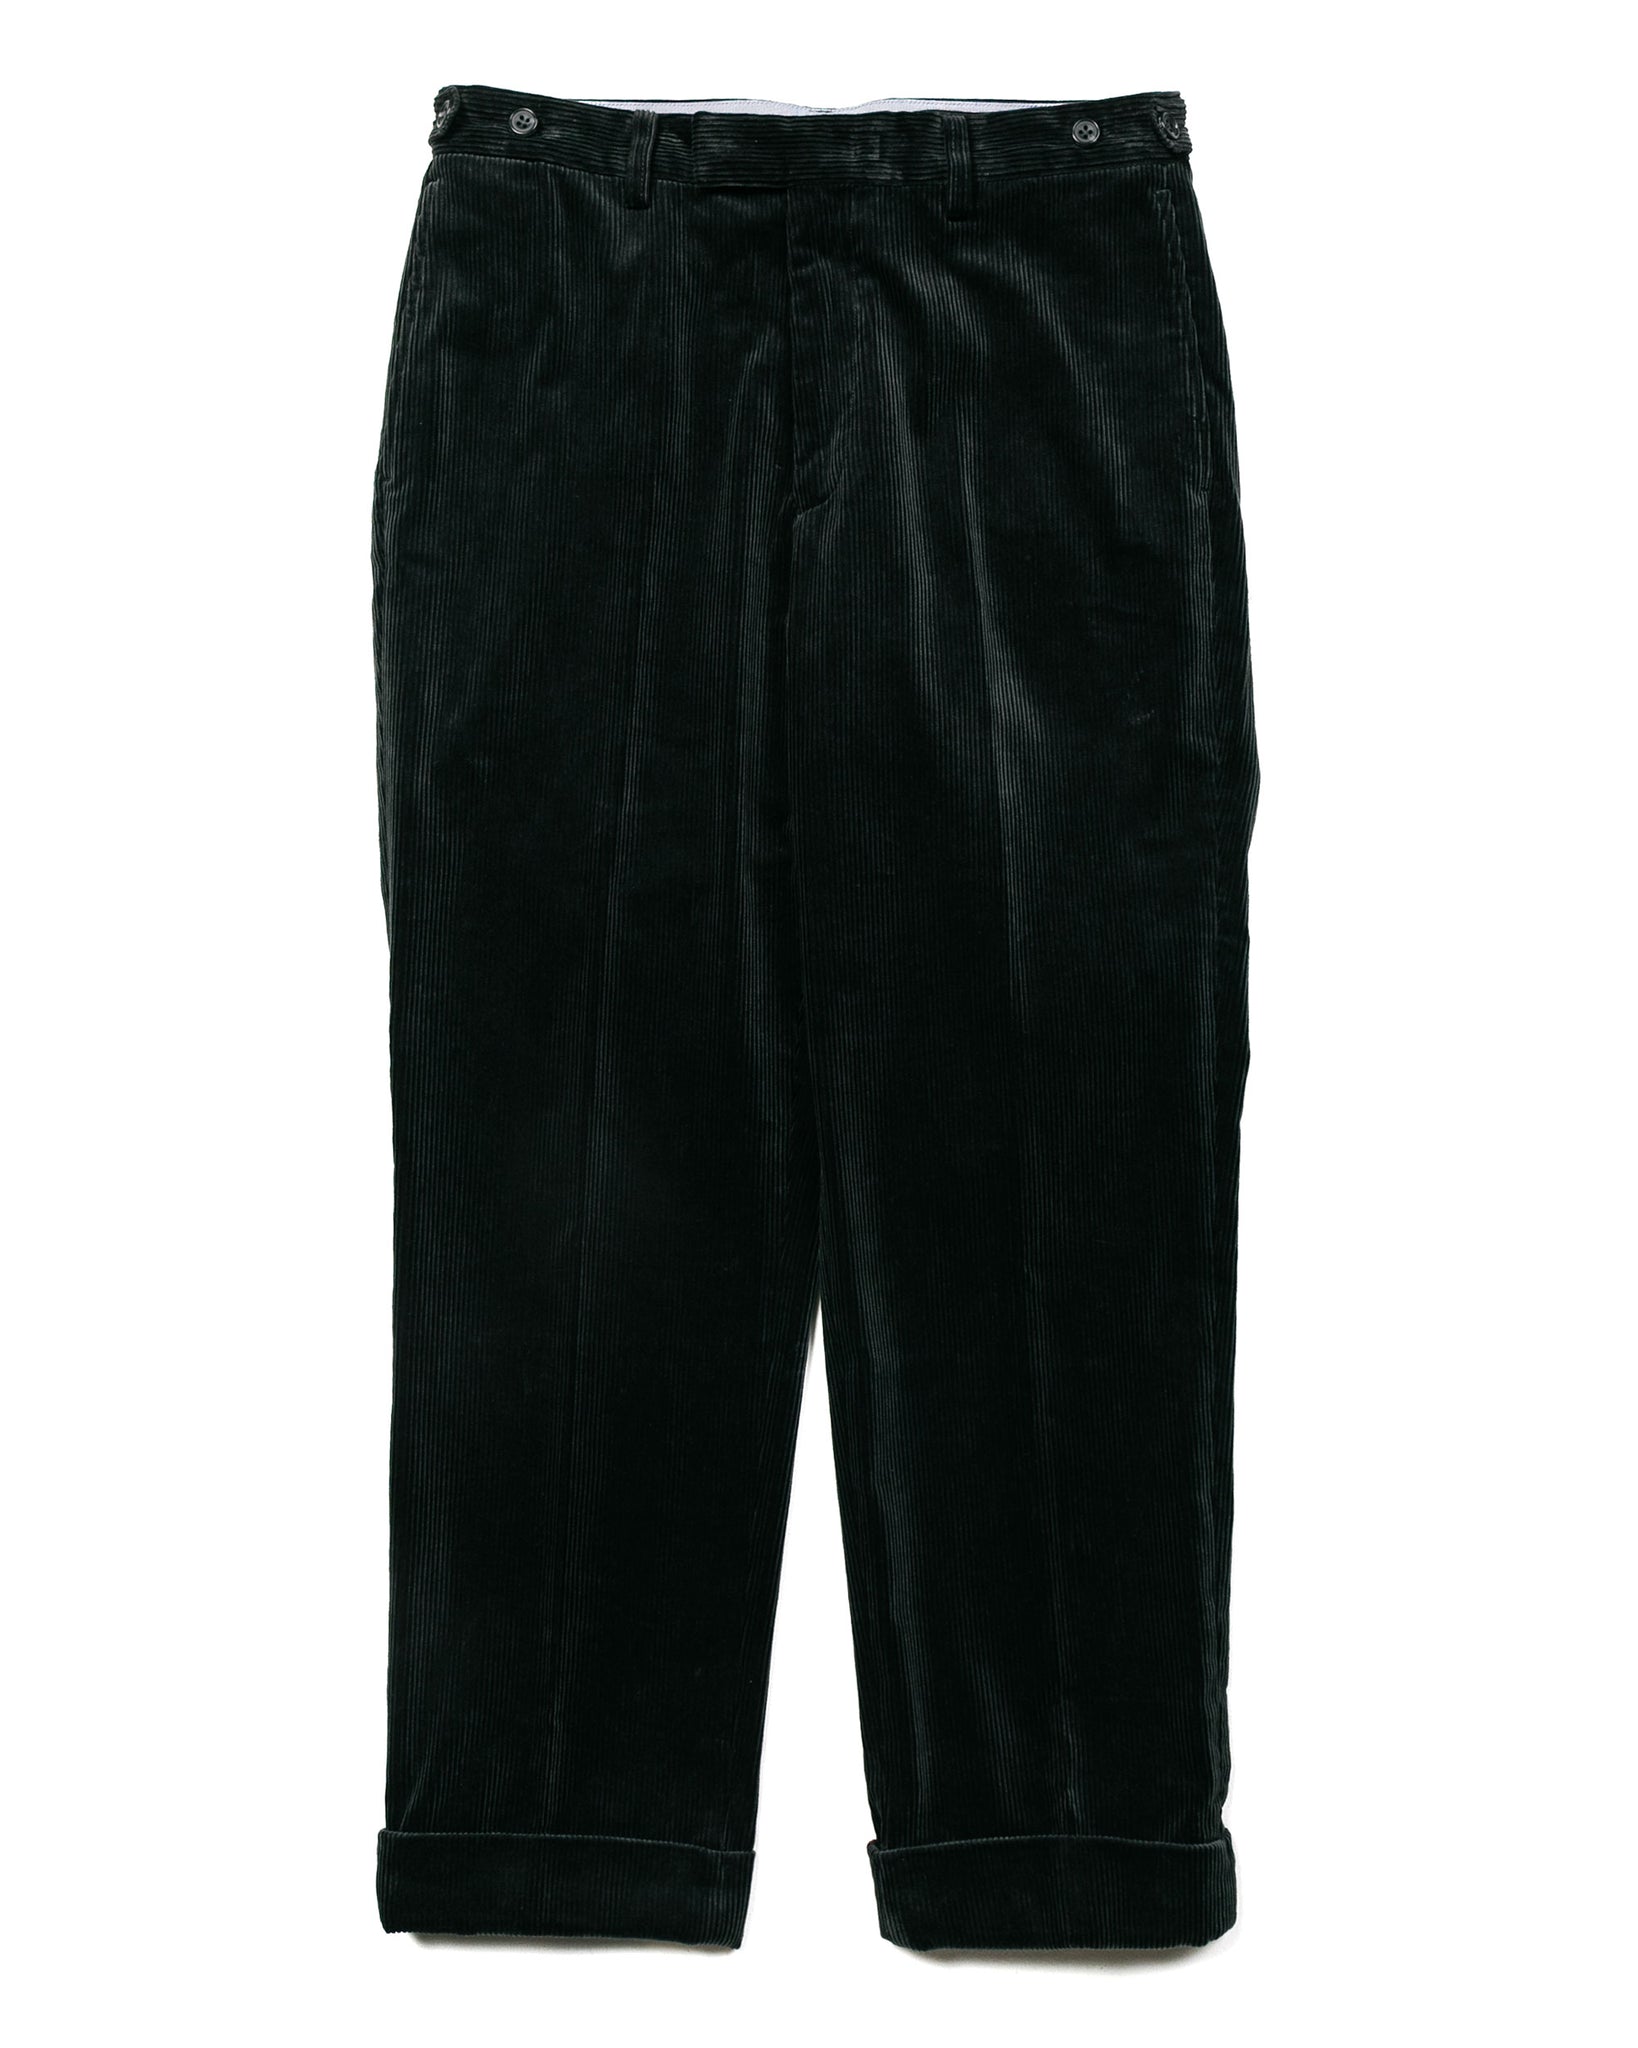 Beams Plus Ivy Trousers Ankle-Cut Corduroy Charcoal Grey